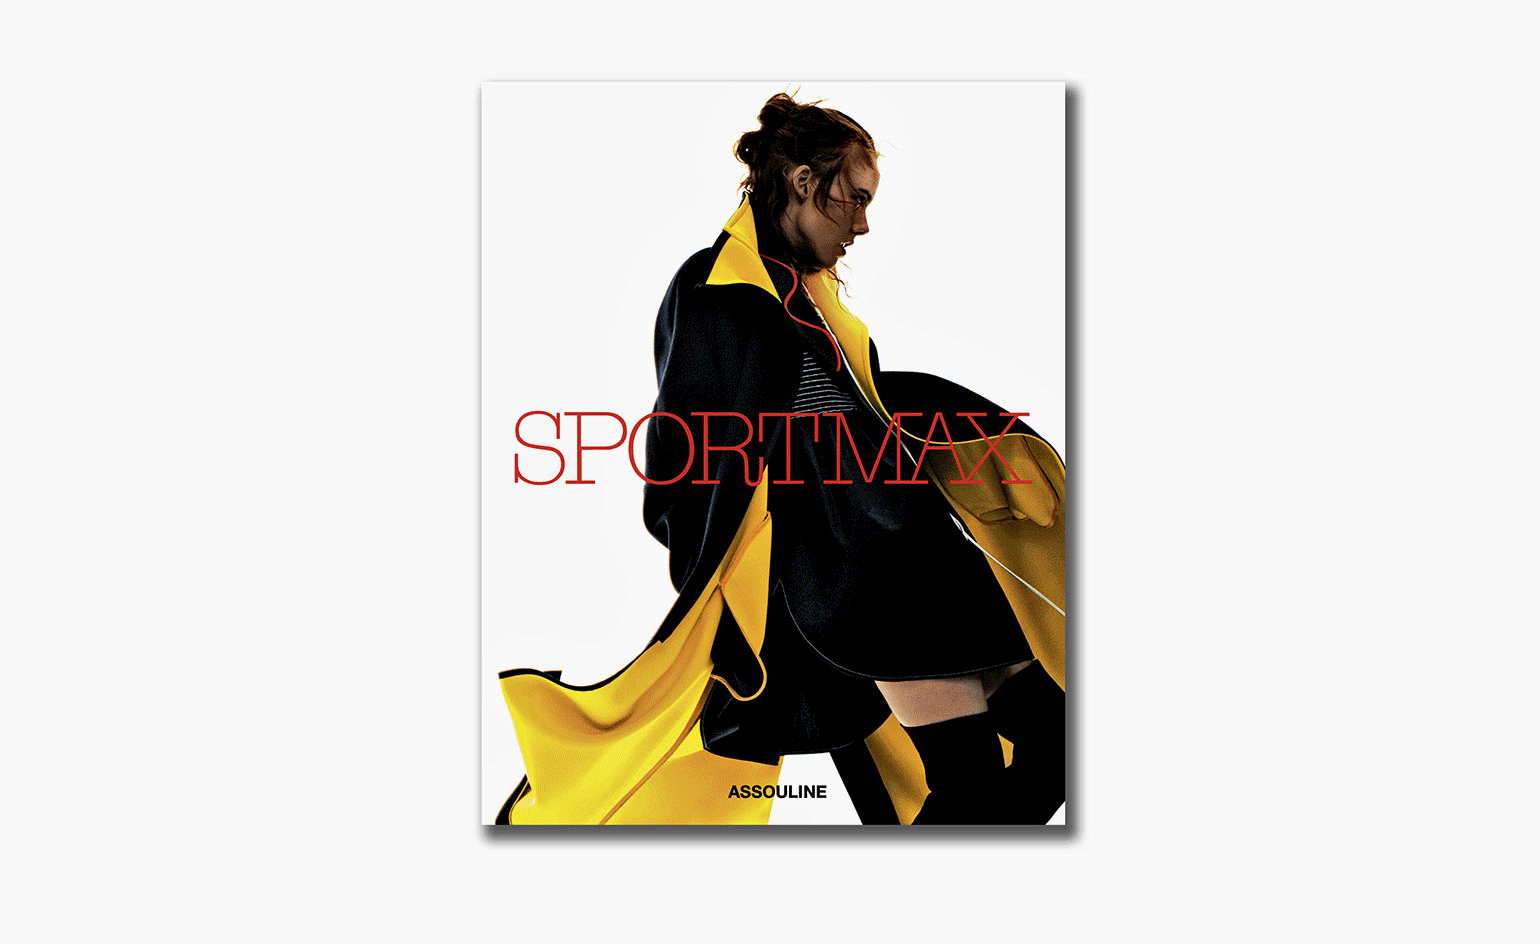 Fashion books Sportmax, by Olivier Saillard front cover